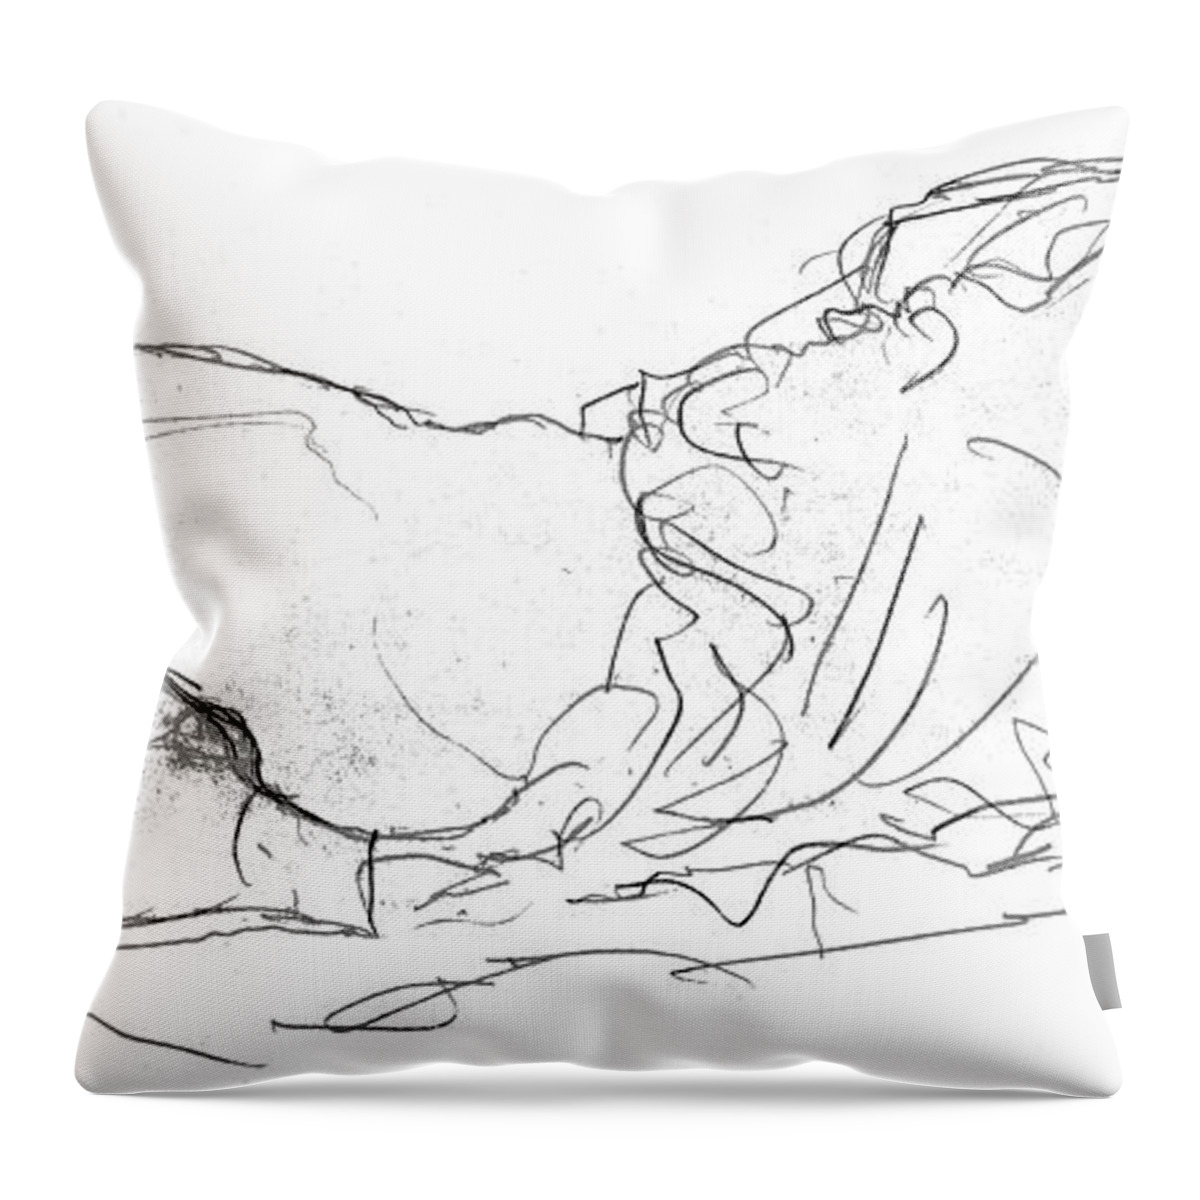 Klimt Throw Pillow featuring the drawing Couple in Bed by Gustav Klimt